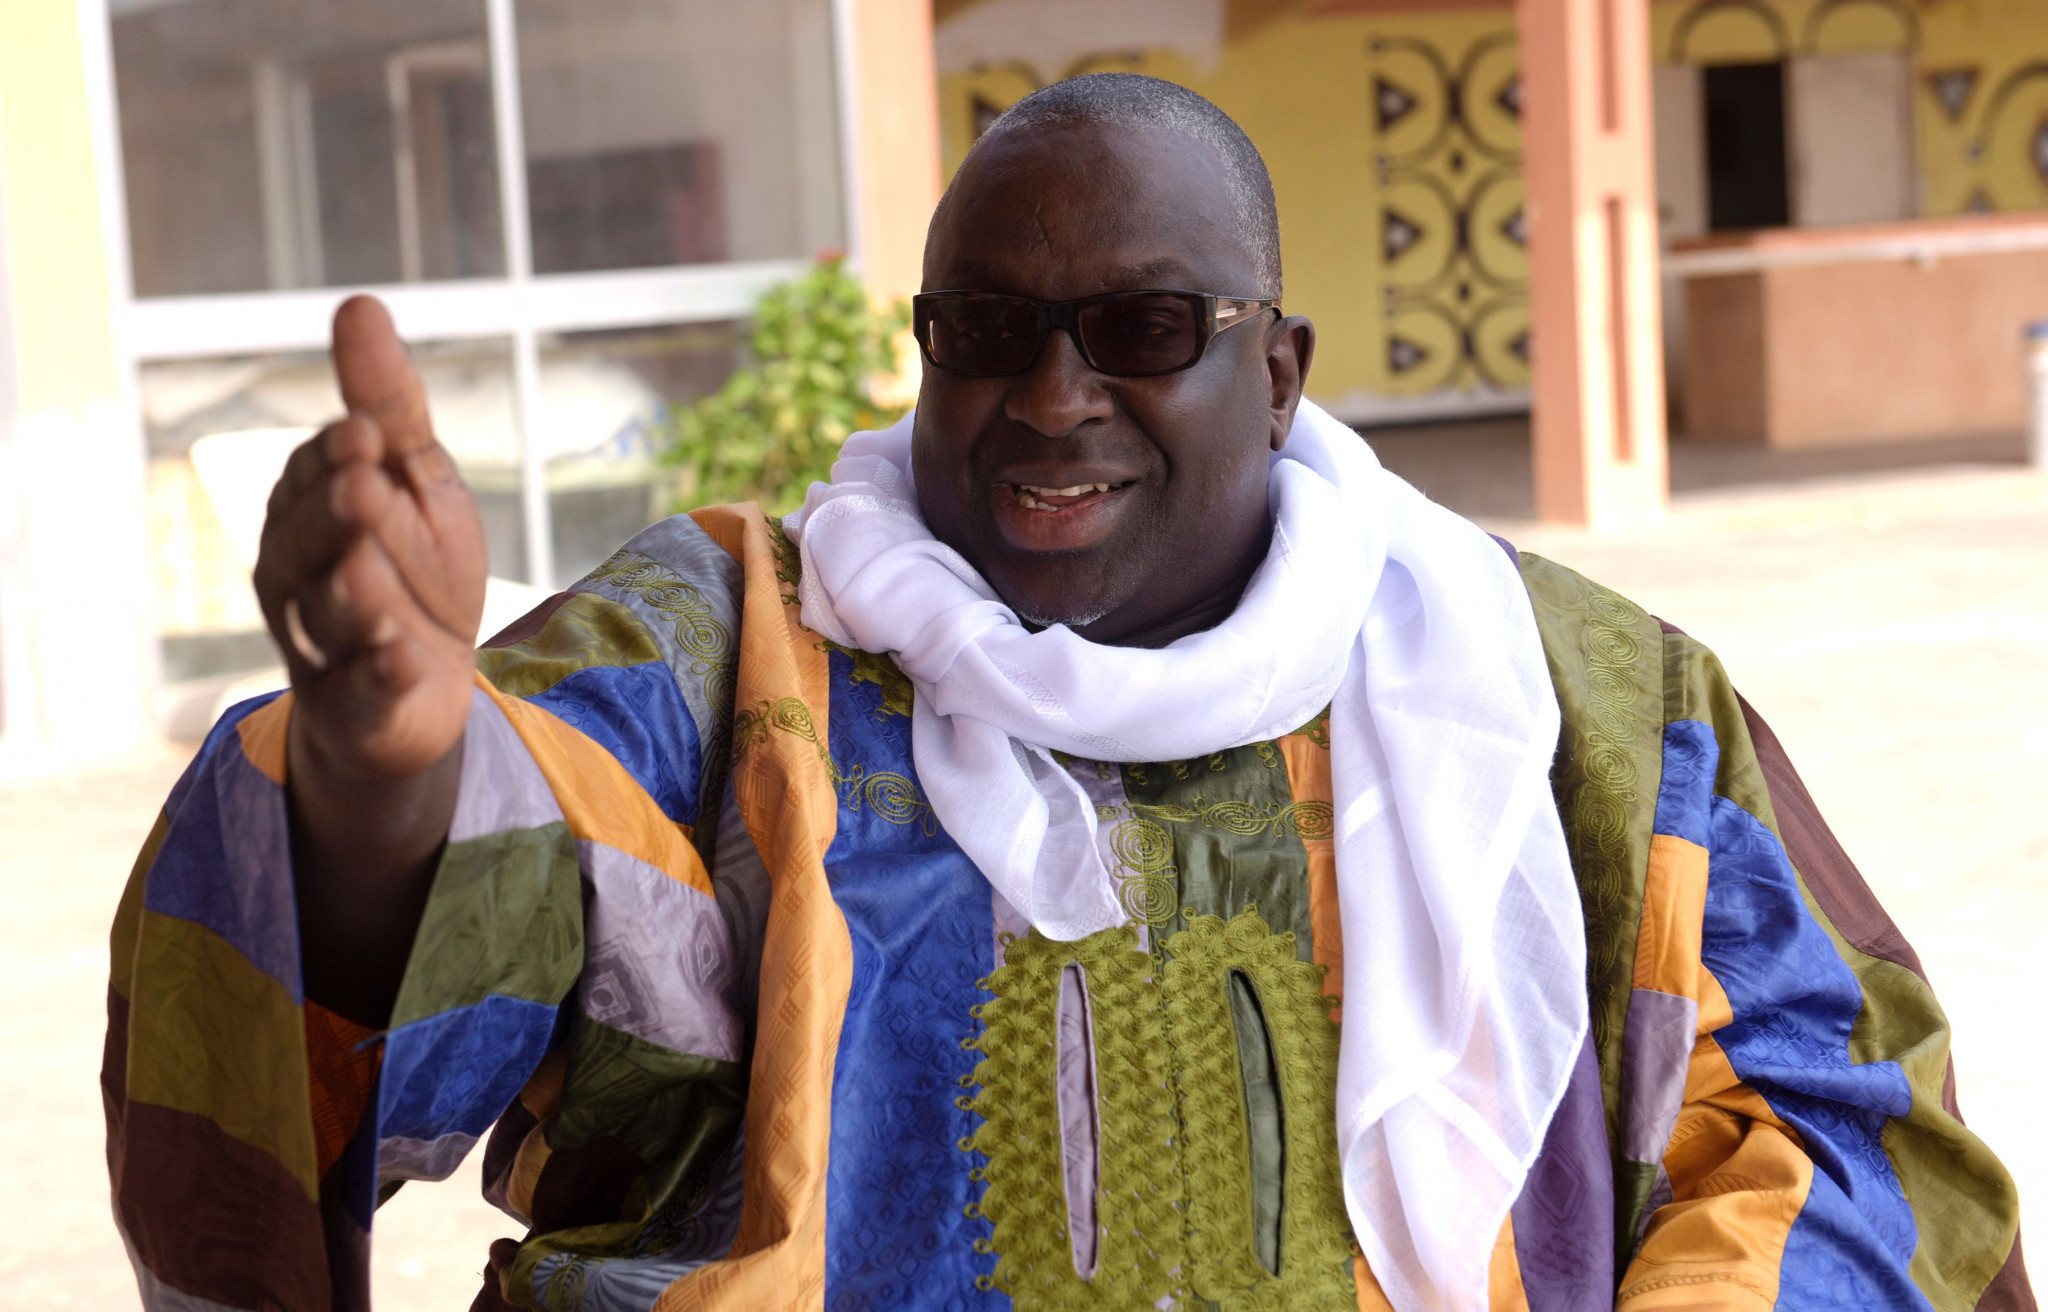 Papa Massata Diack, pictured, asked Tan Tong Han to lie, it is claimed ©Getty Images